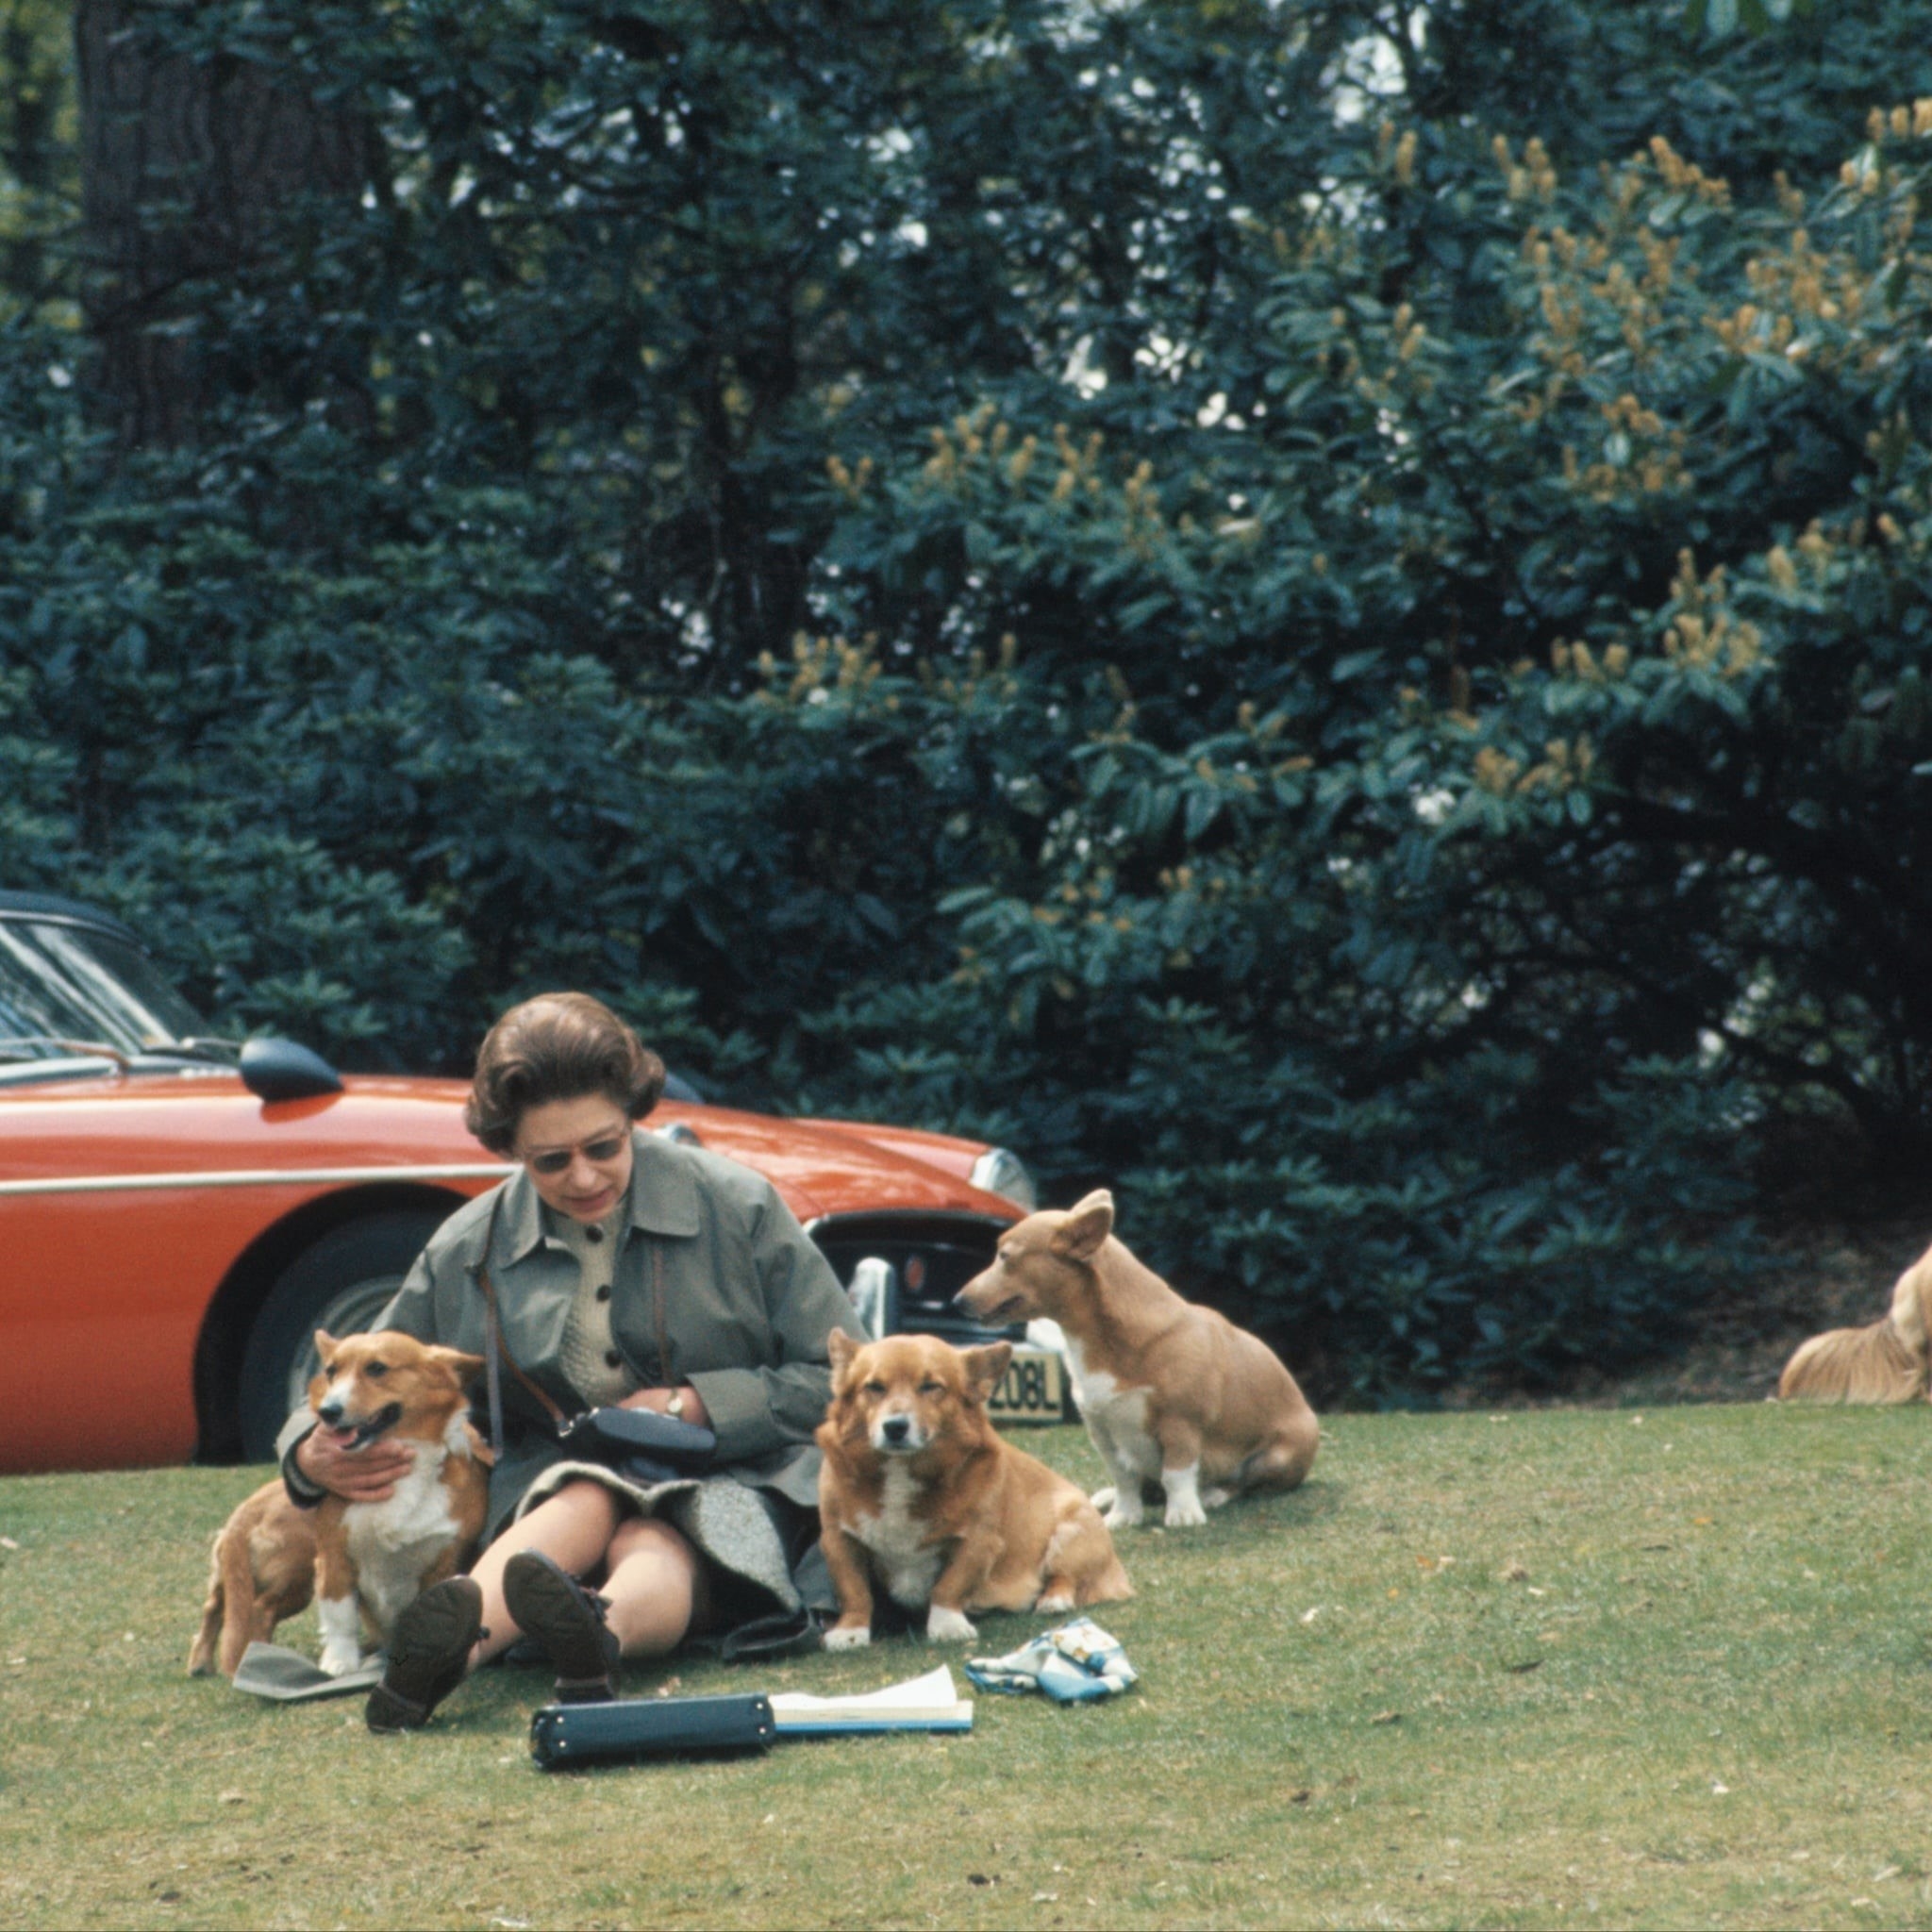 young queen looking really cool patting some dogs in front of a cool old red car (obviously wearing sunnies again)